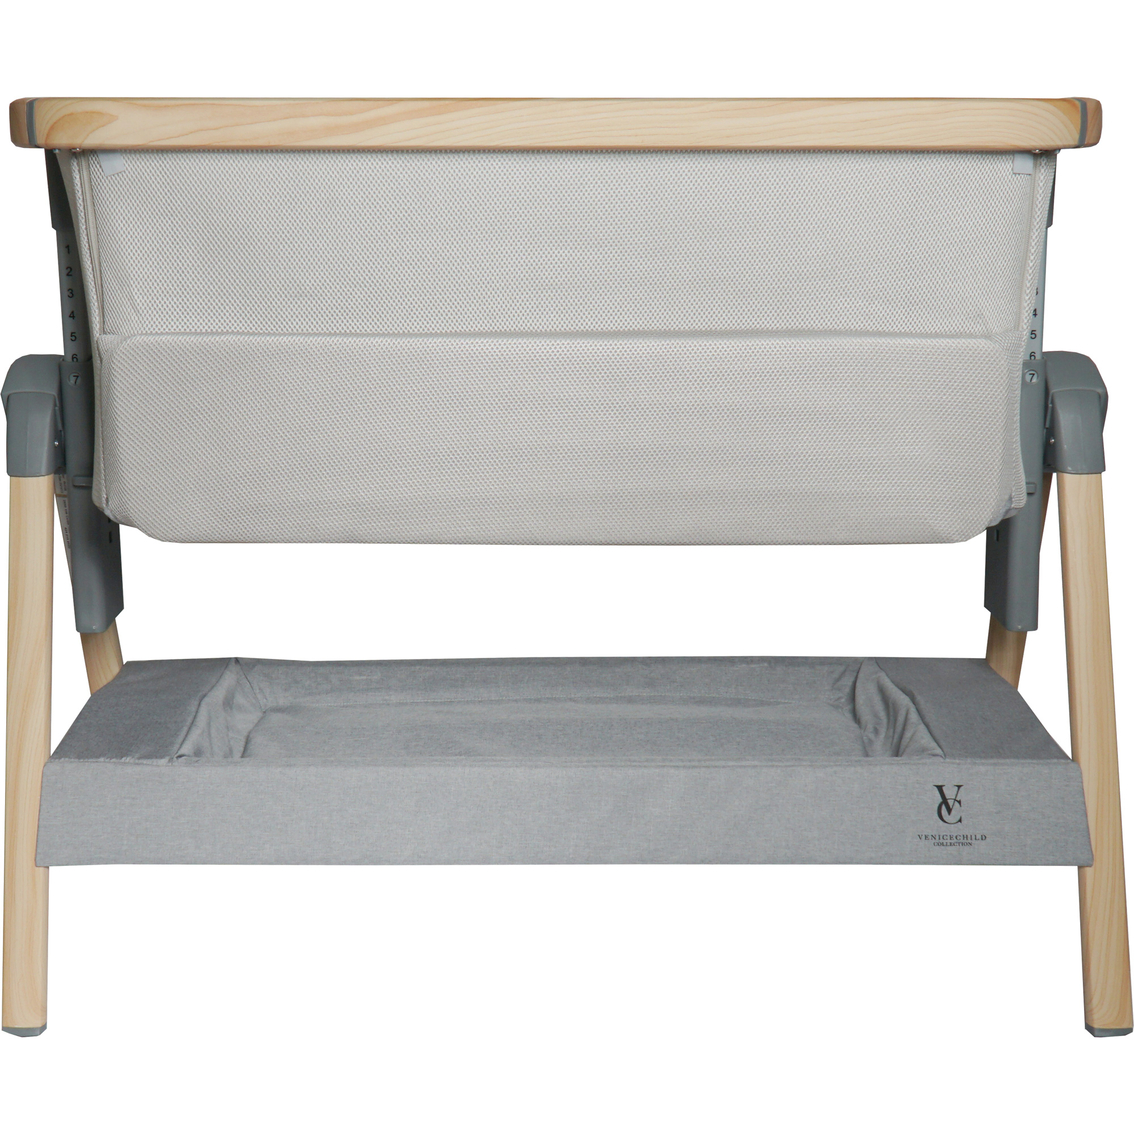 Venice Child California Dreaming Gray Wood Bedside Bassinet - Image 1 of 7